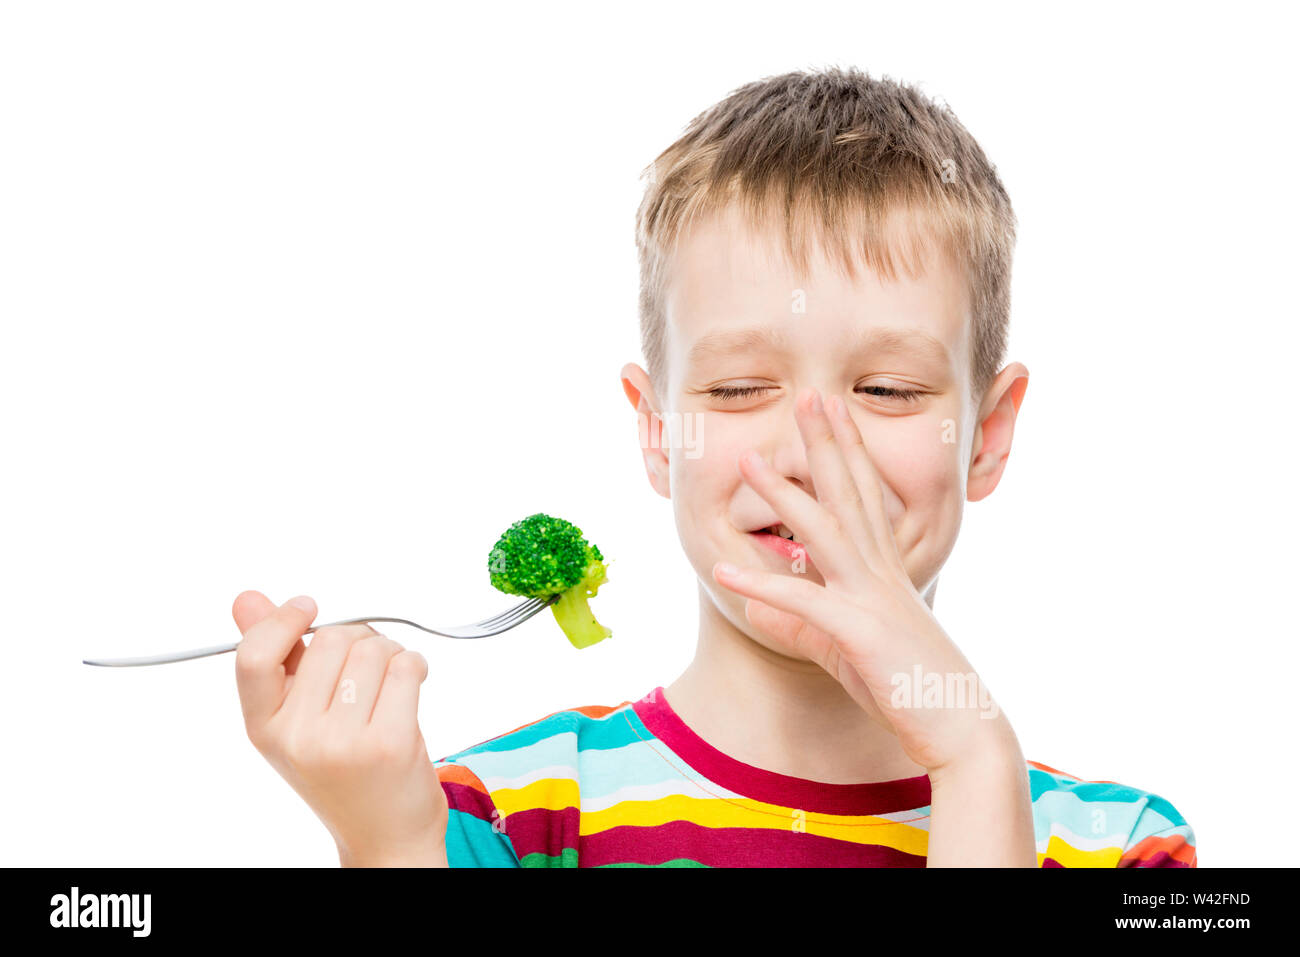 The boy with contempt looks at broccoli, portrait is isolated on white background Stock Photo